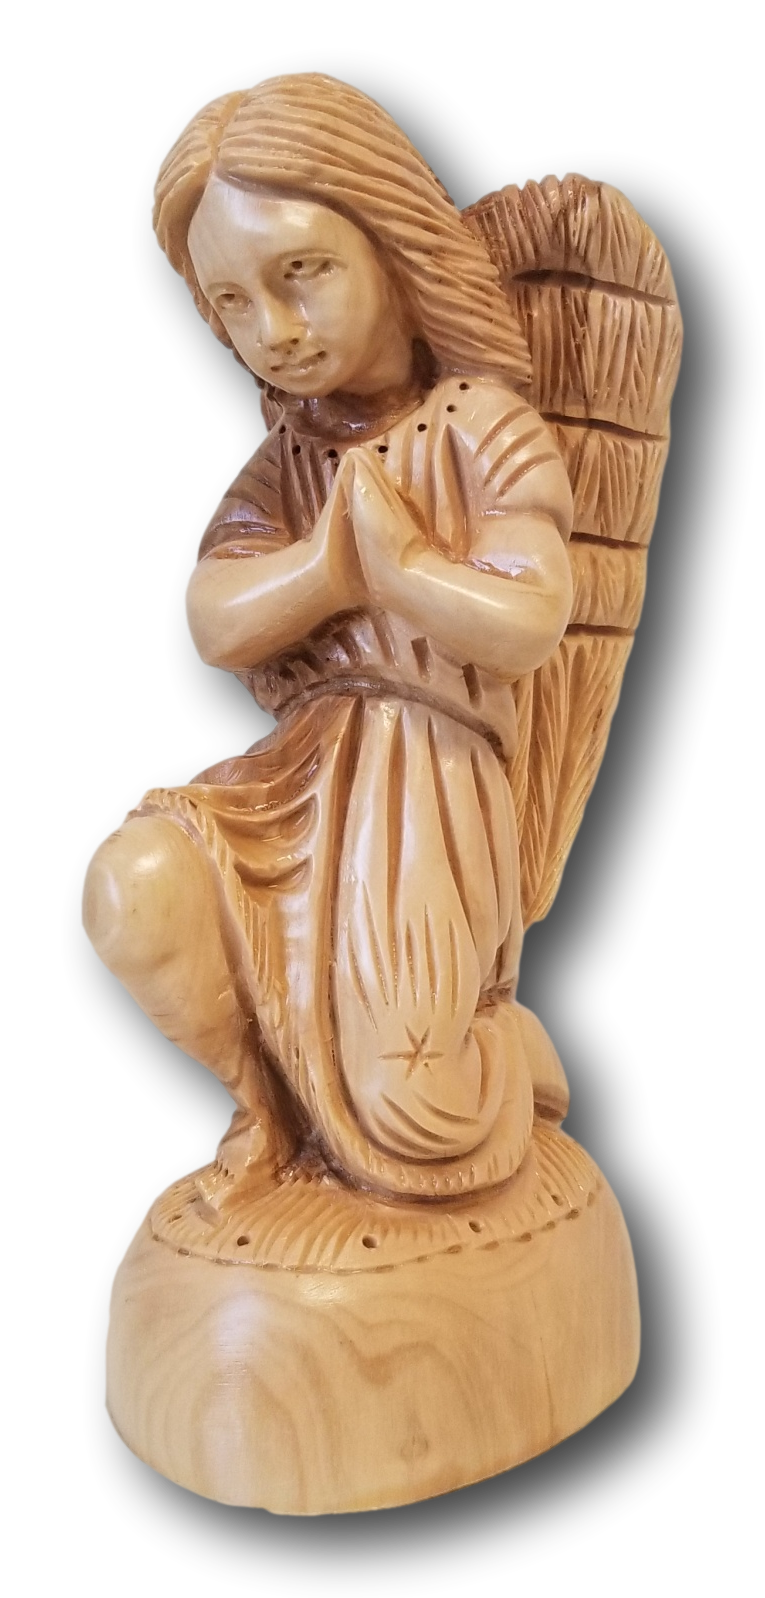 Kneeling Angel praying. Available in Two sizes